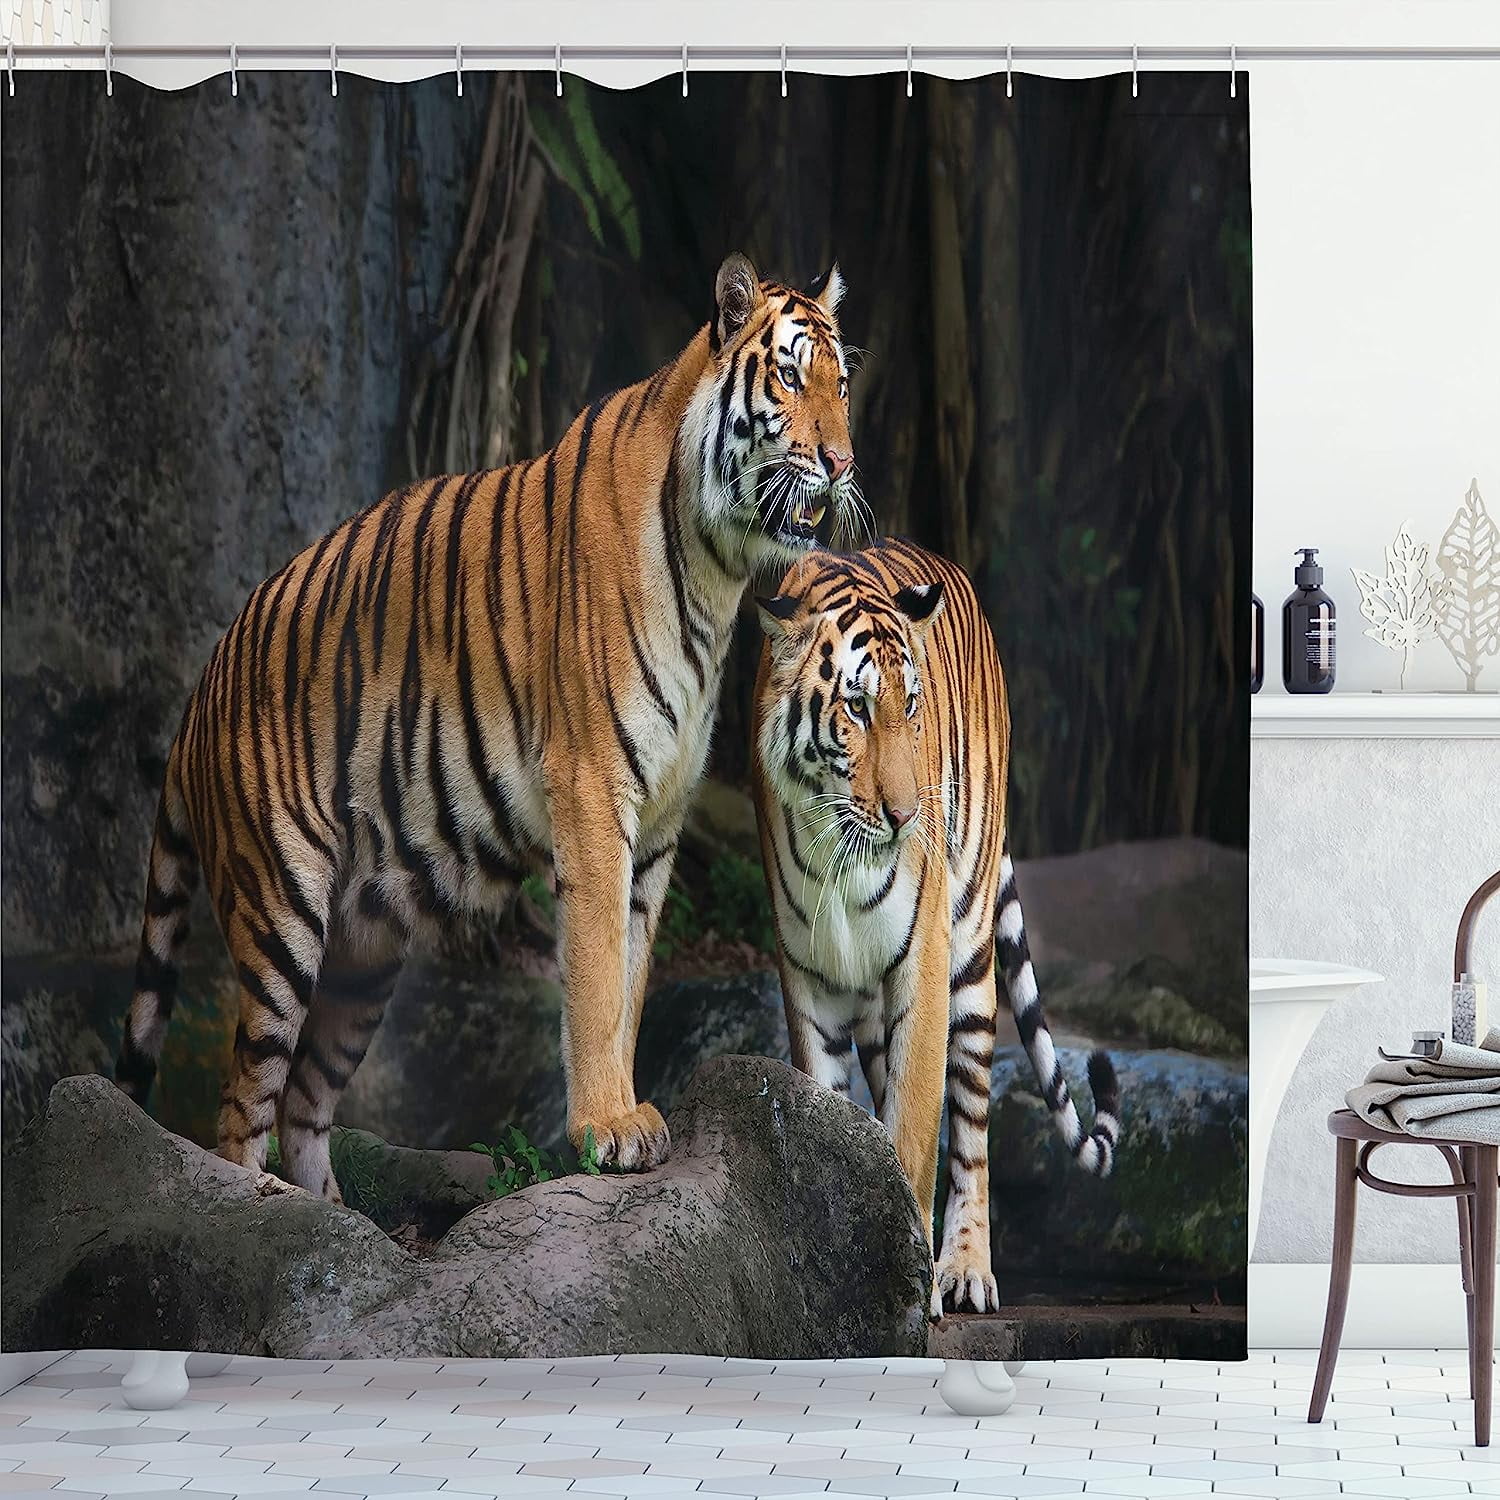 JOOCAR Animal Shower Curtain, Tiger Couple in The Jungle on Big Rocks Image  Wild Cats in Nature Image Print, Cloth Fabric Bathroom Decor Set with Hooks,  72x72 inch, Grey and Ginger 